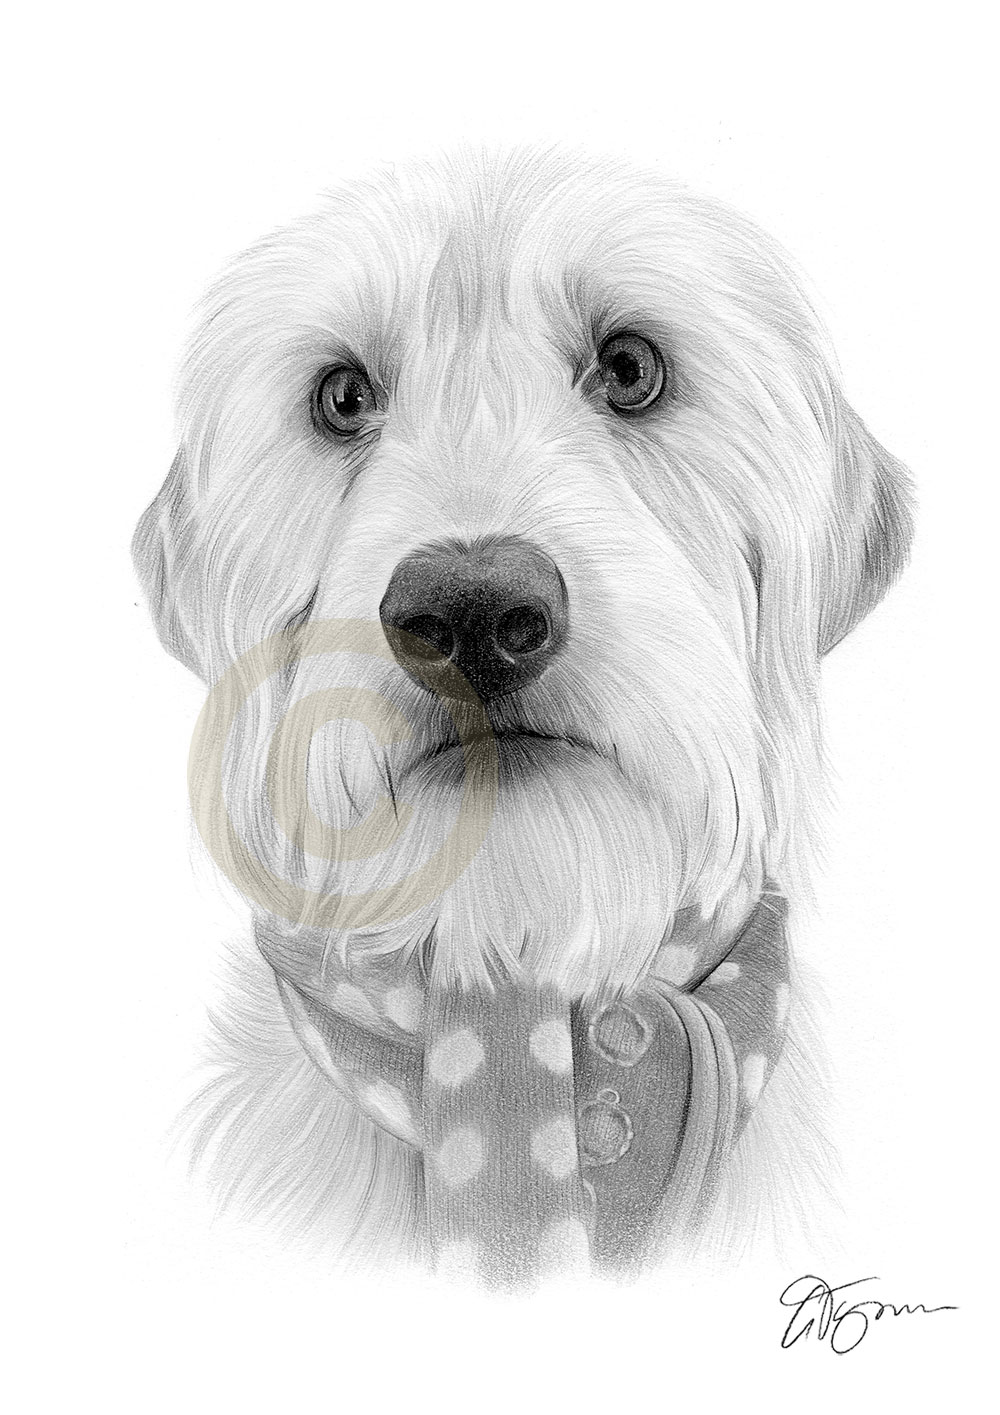 Pet portrait commission of a dog called Sandie by artist Gary Tymon